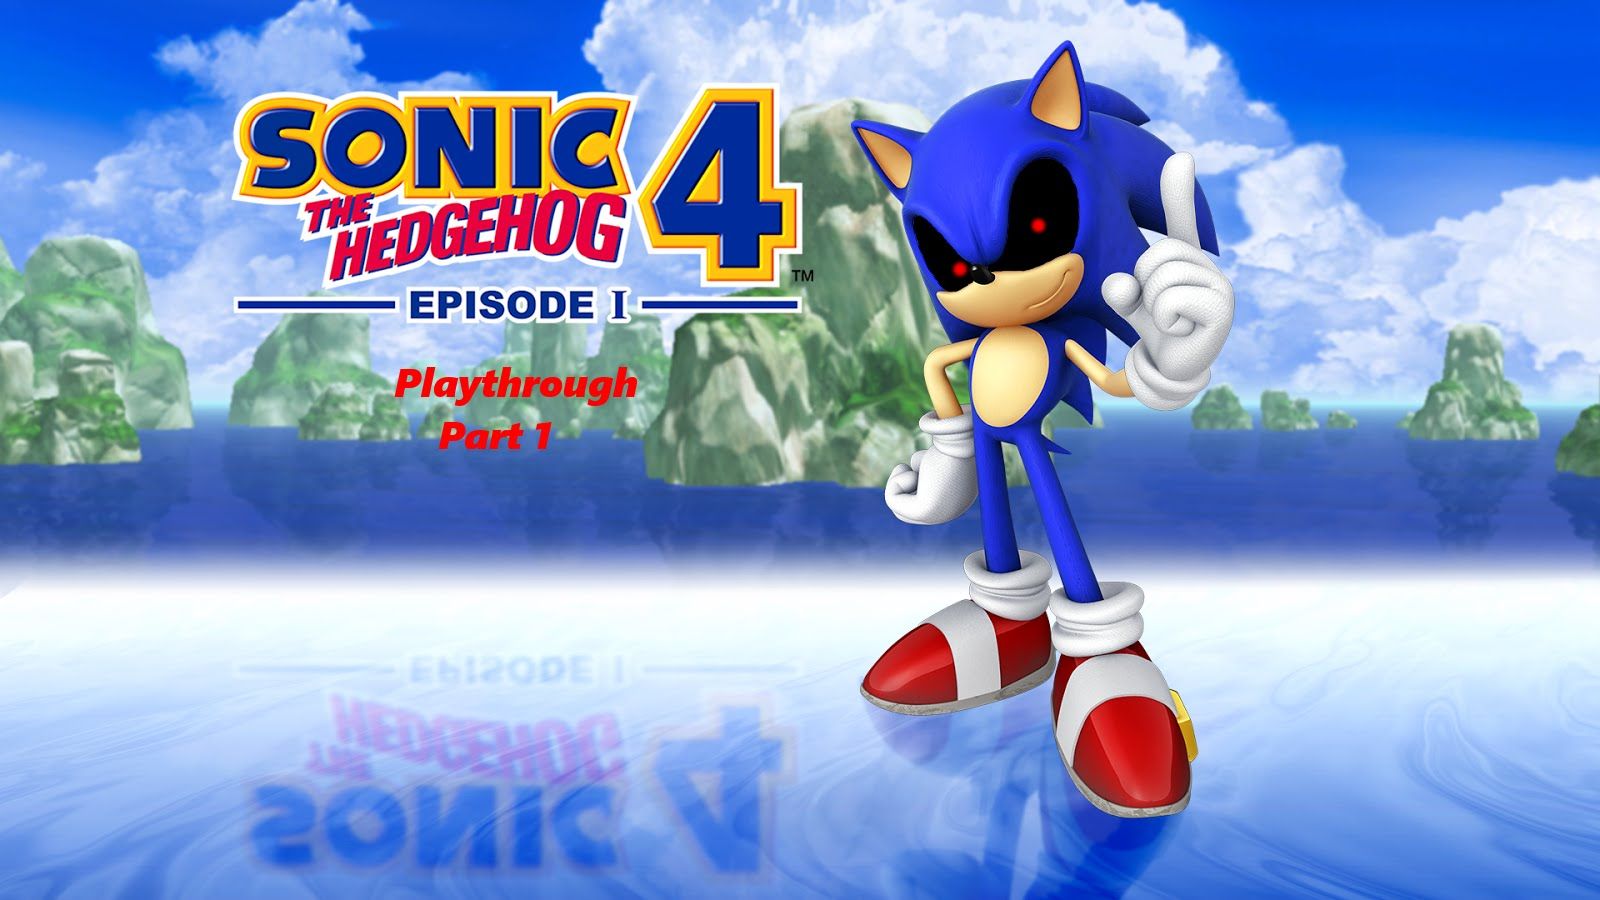 Sonic The Hedgehog - Sonic 4 Episode 1 Ps3 , HD Wallpaper & Backgrounds